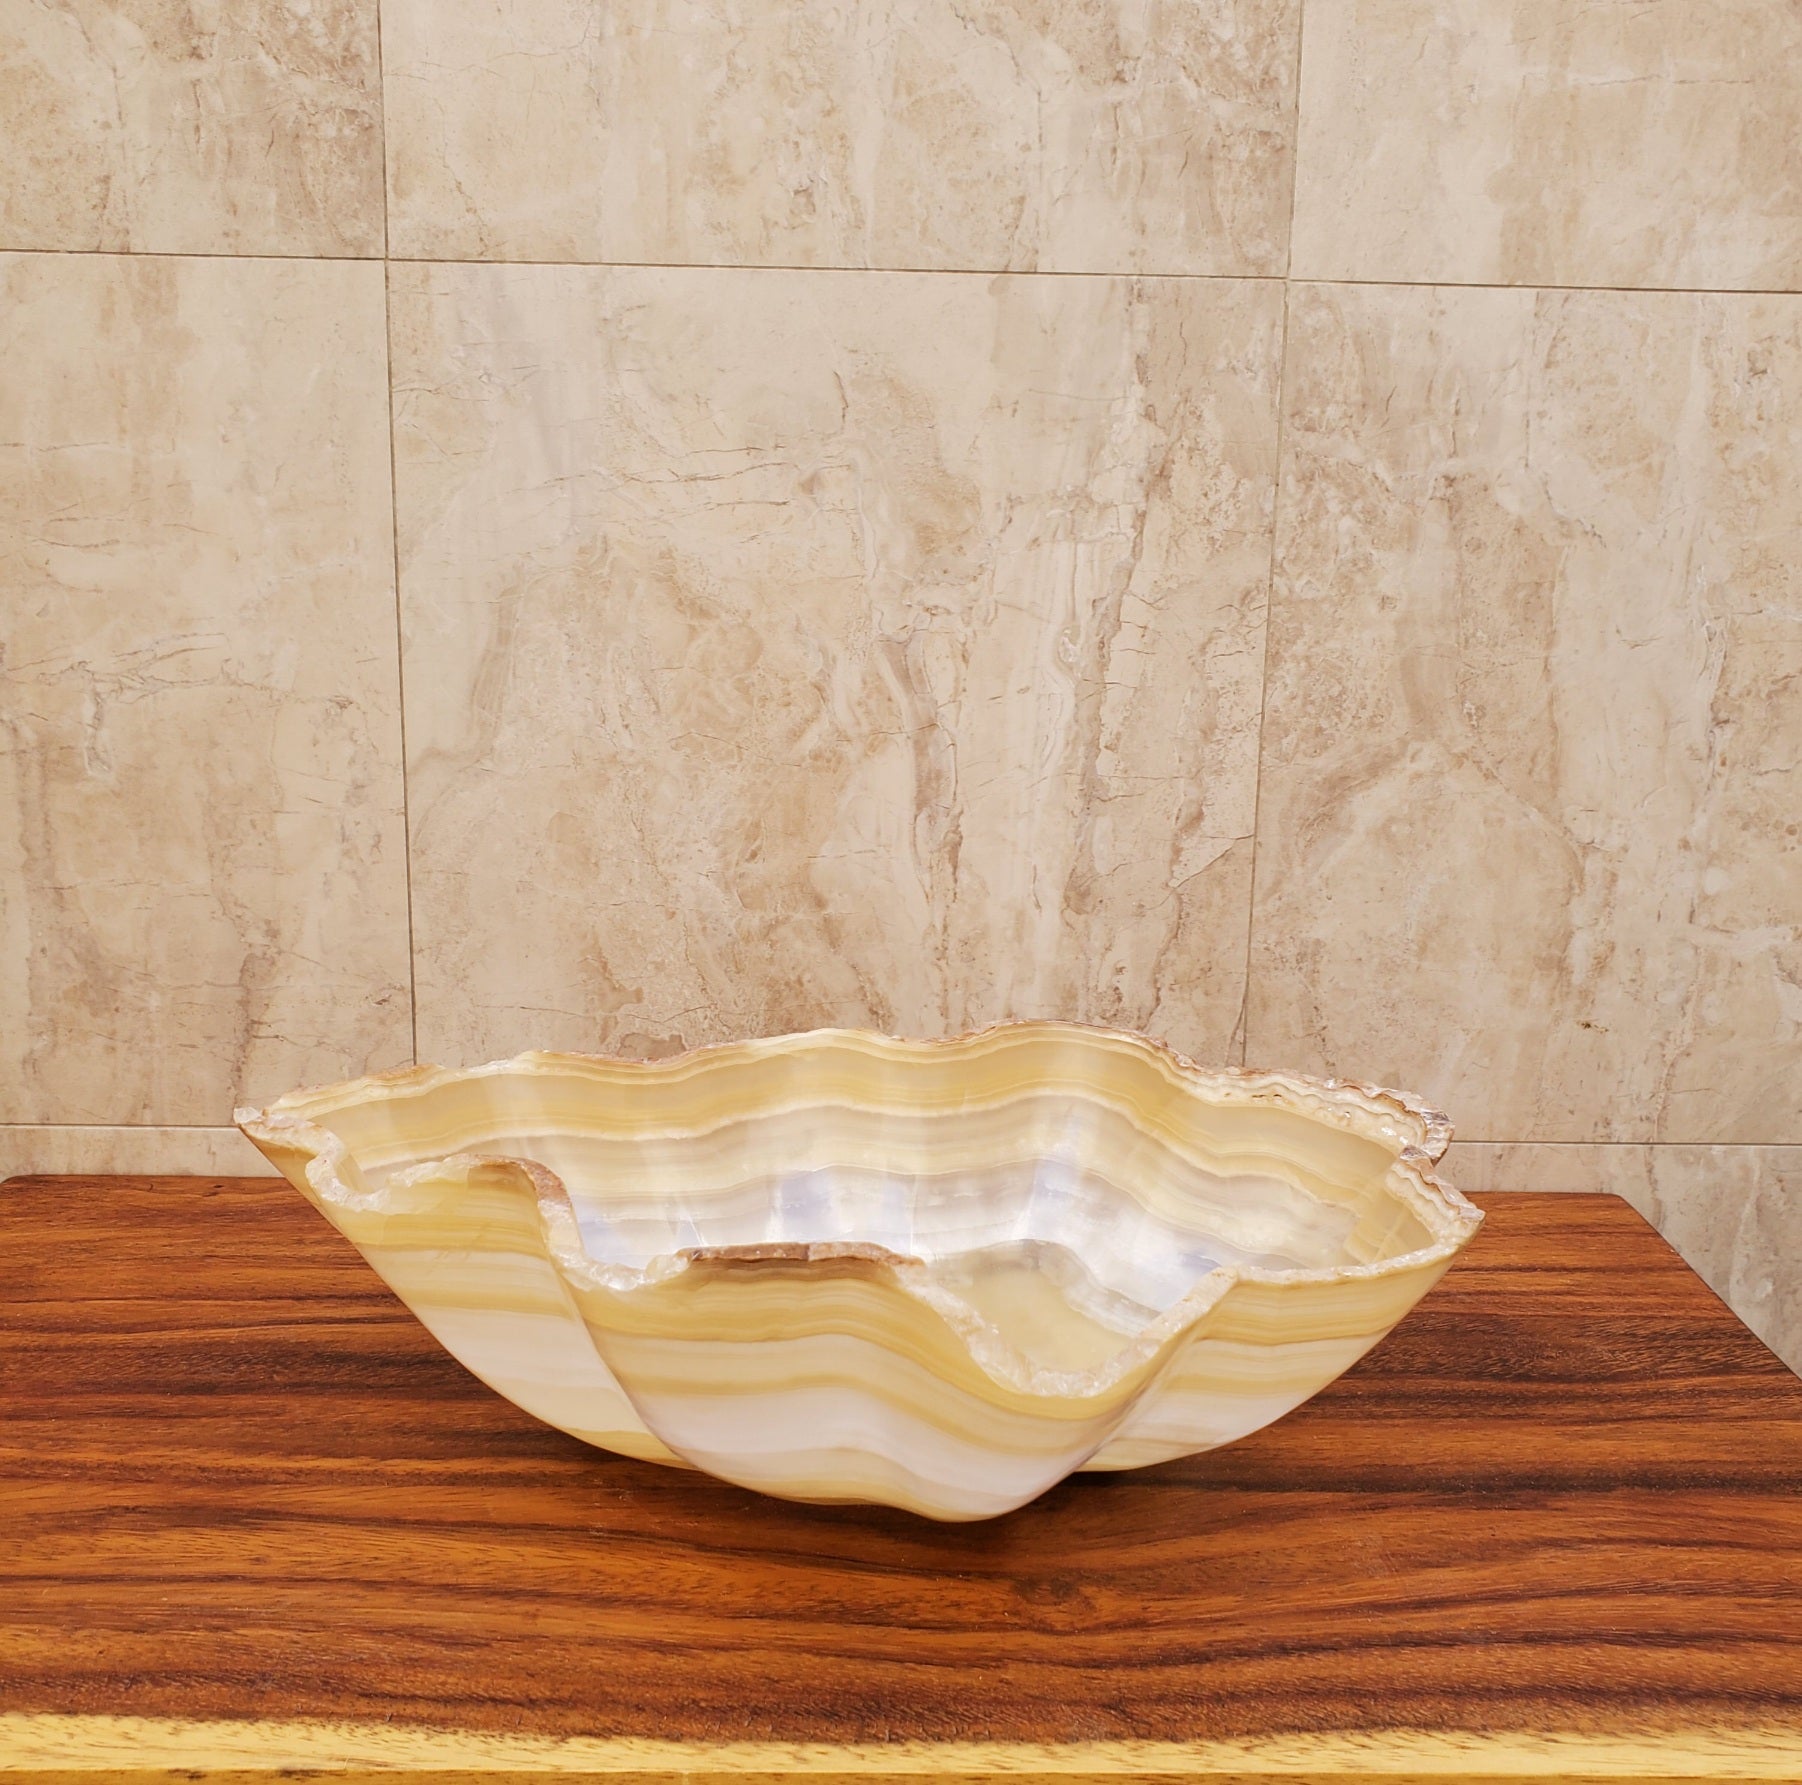 Beige and White Onyx Oyster Shell Shaped Vessel Sink. Handmade in Mexico. We hand finish and ship from the USA. Buy now at www.felipeandgrace.com.